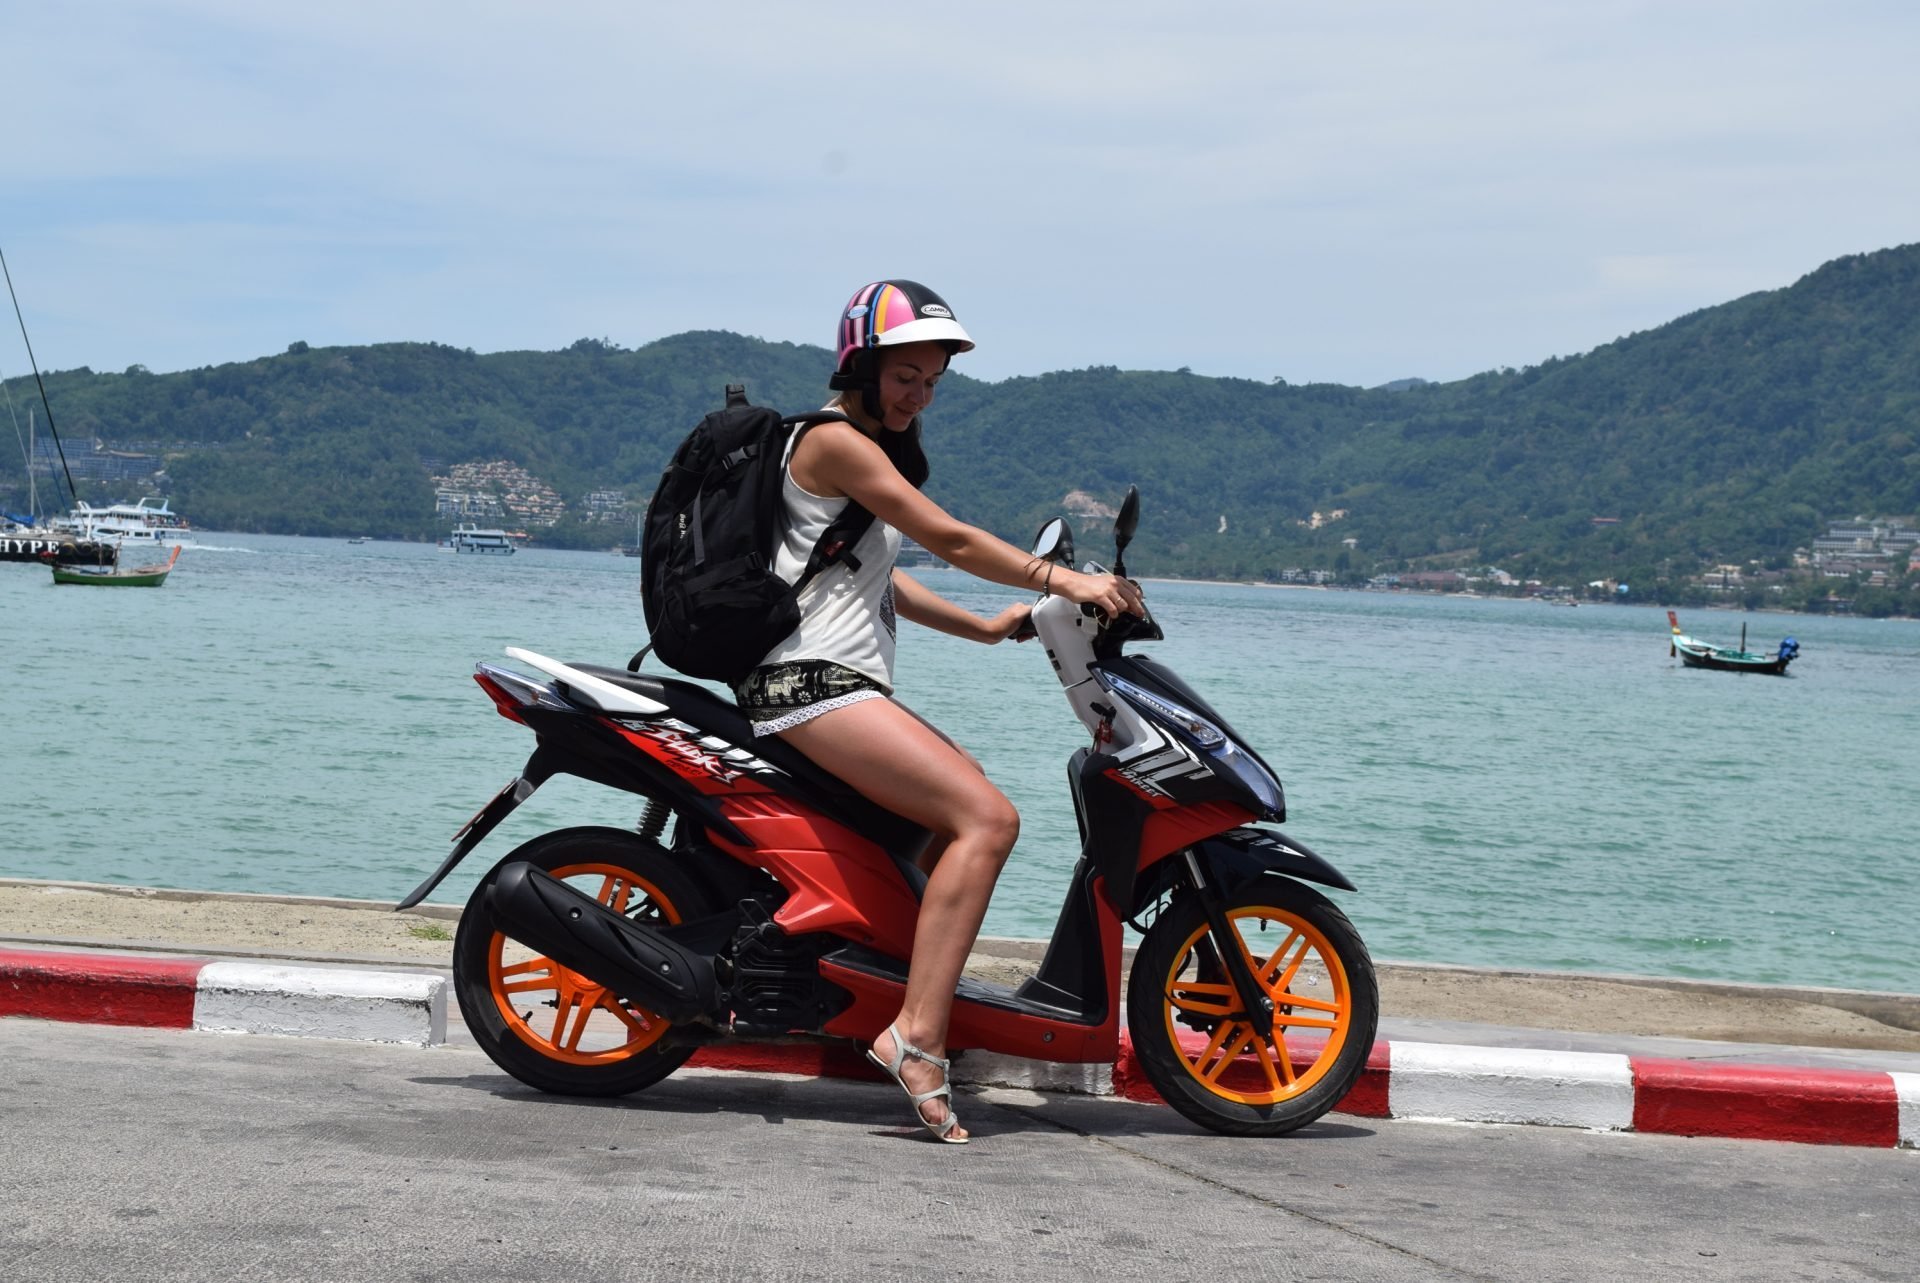 Rent a bike in Phuket without a license: rules and recommendations for tourists